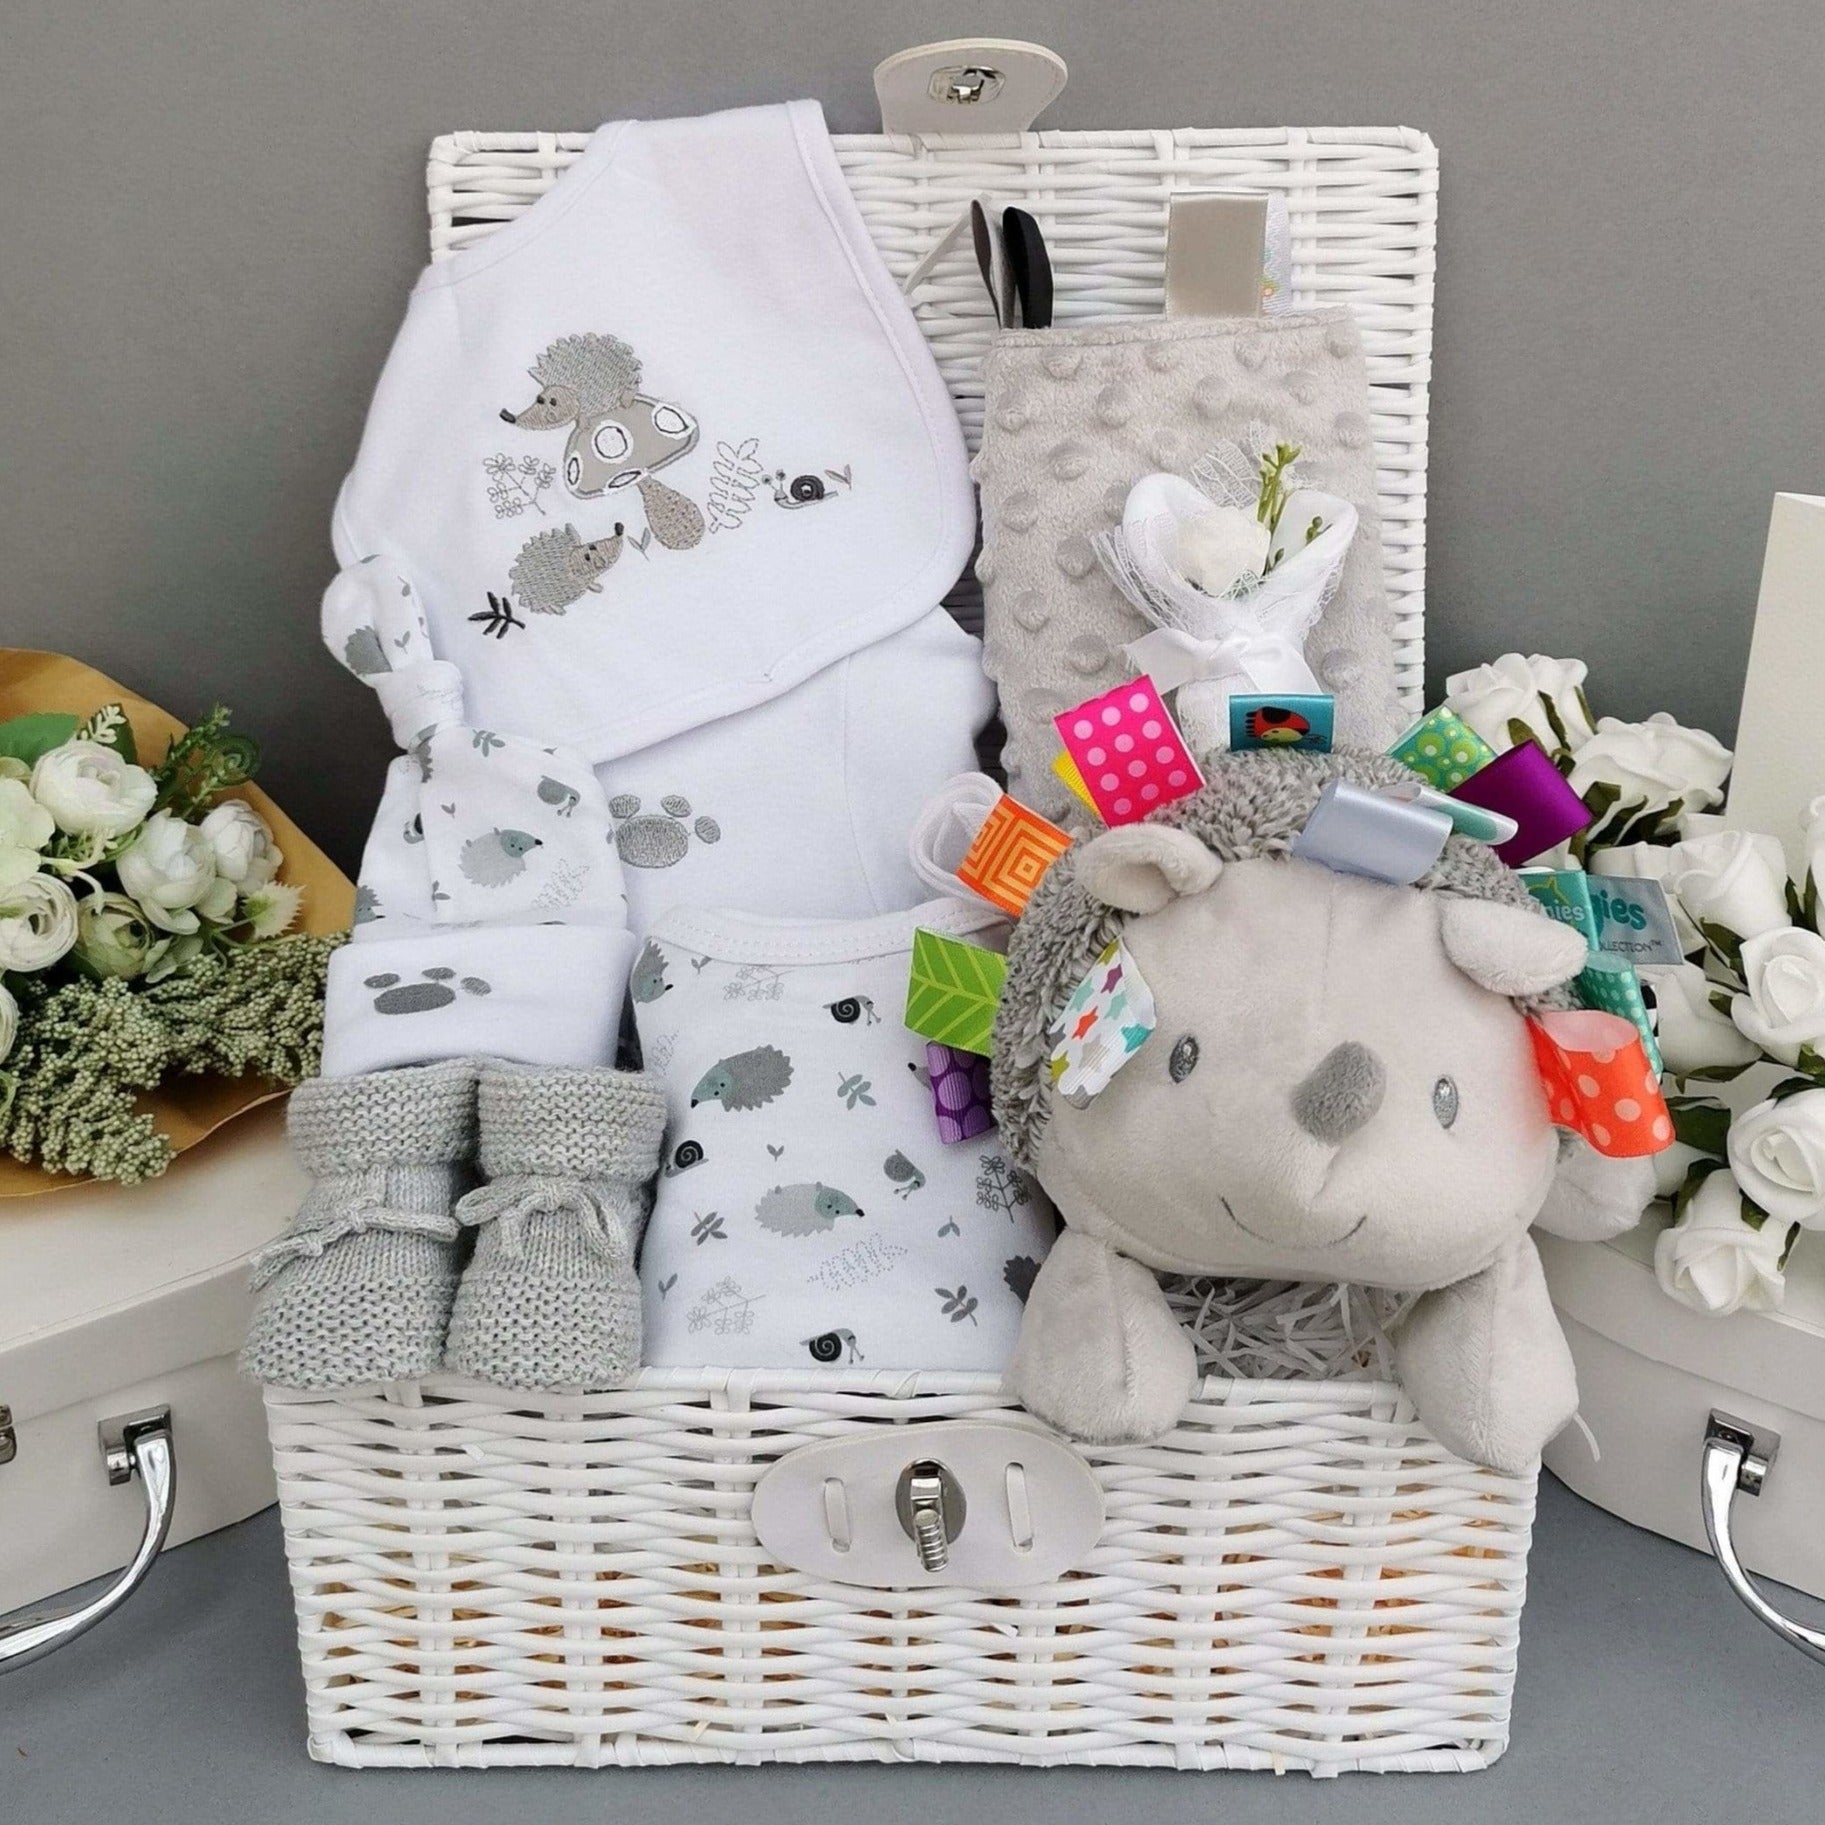 Maternity Leave Gifts – Bumbles & Boo